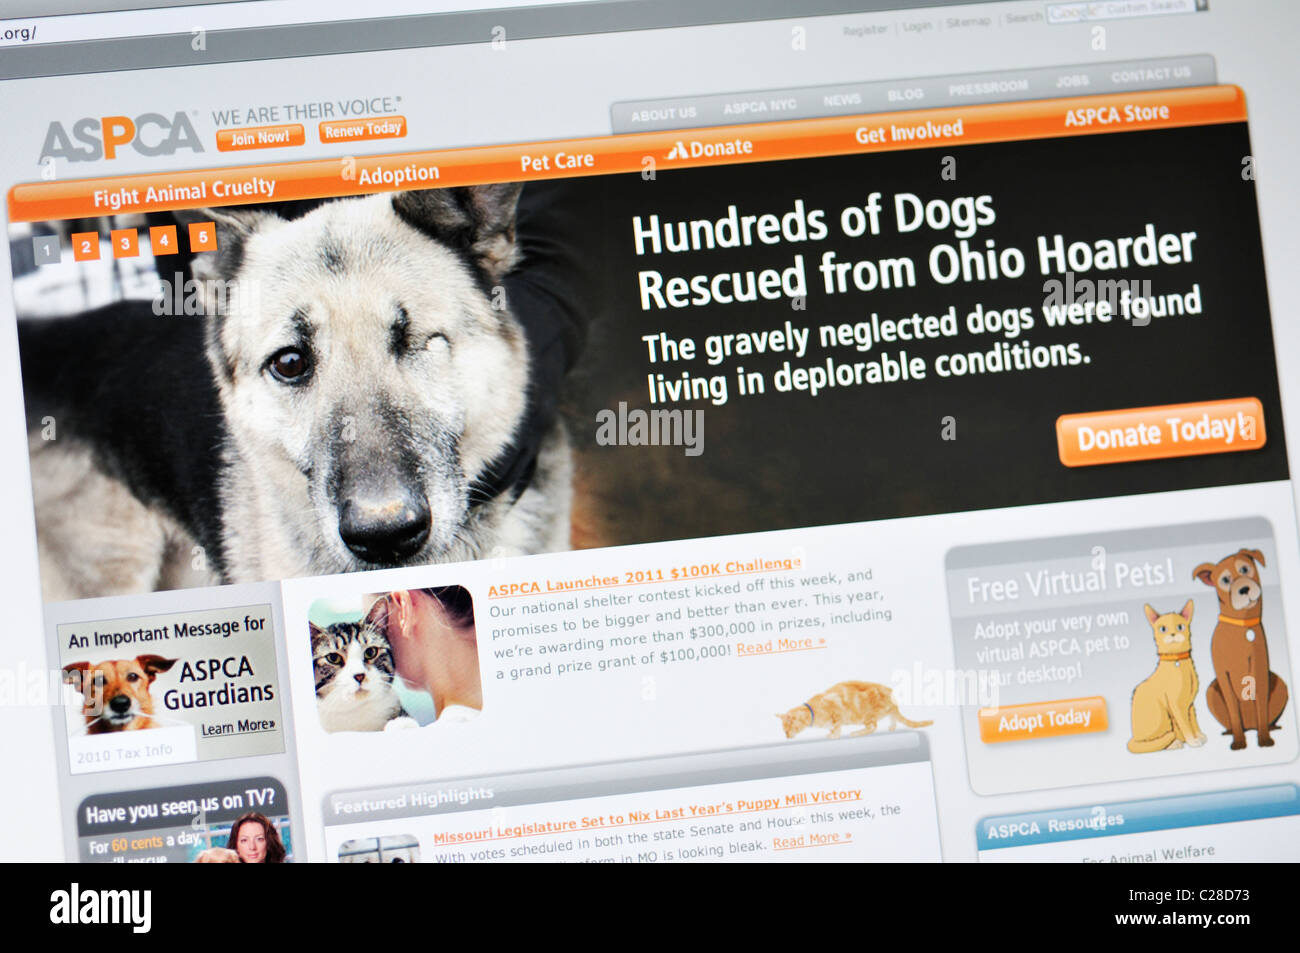 ASPCA website - American Society for the Prevention of Cruelty to Animals  Stock Photo - Alamy